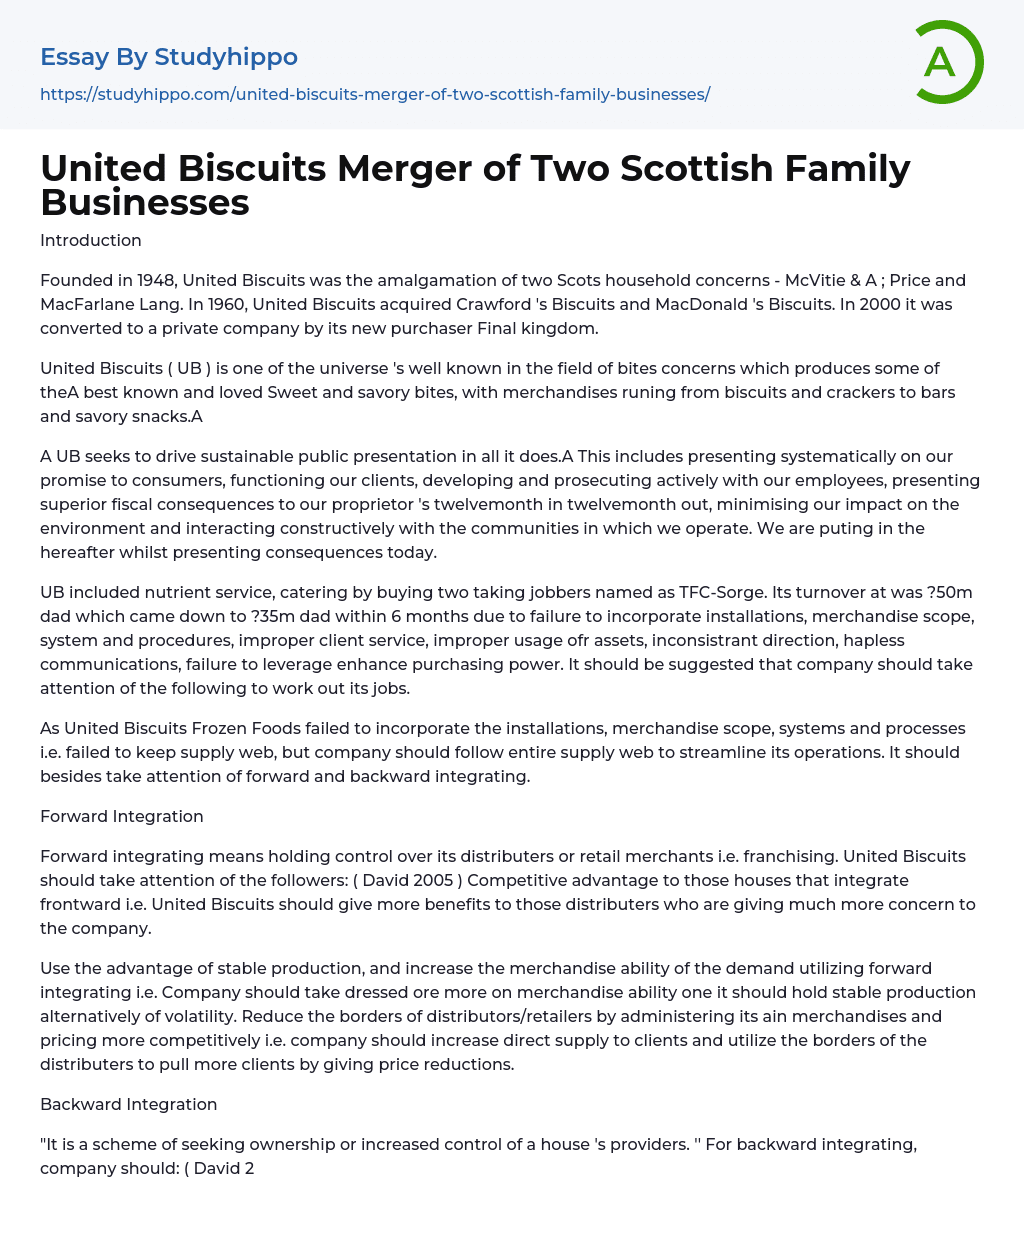 United Biscuits Merger of Two Scottish Family Businesses Essay Example